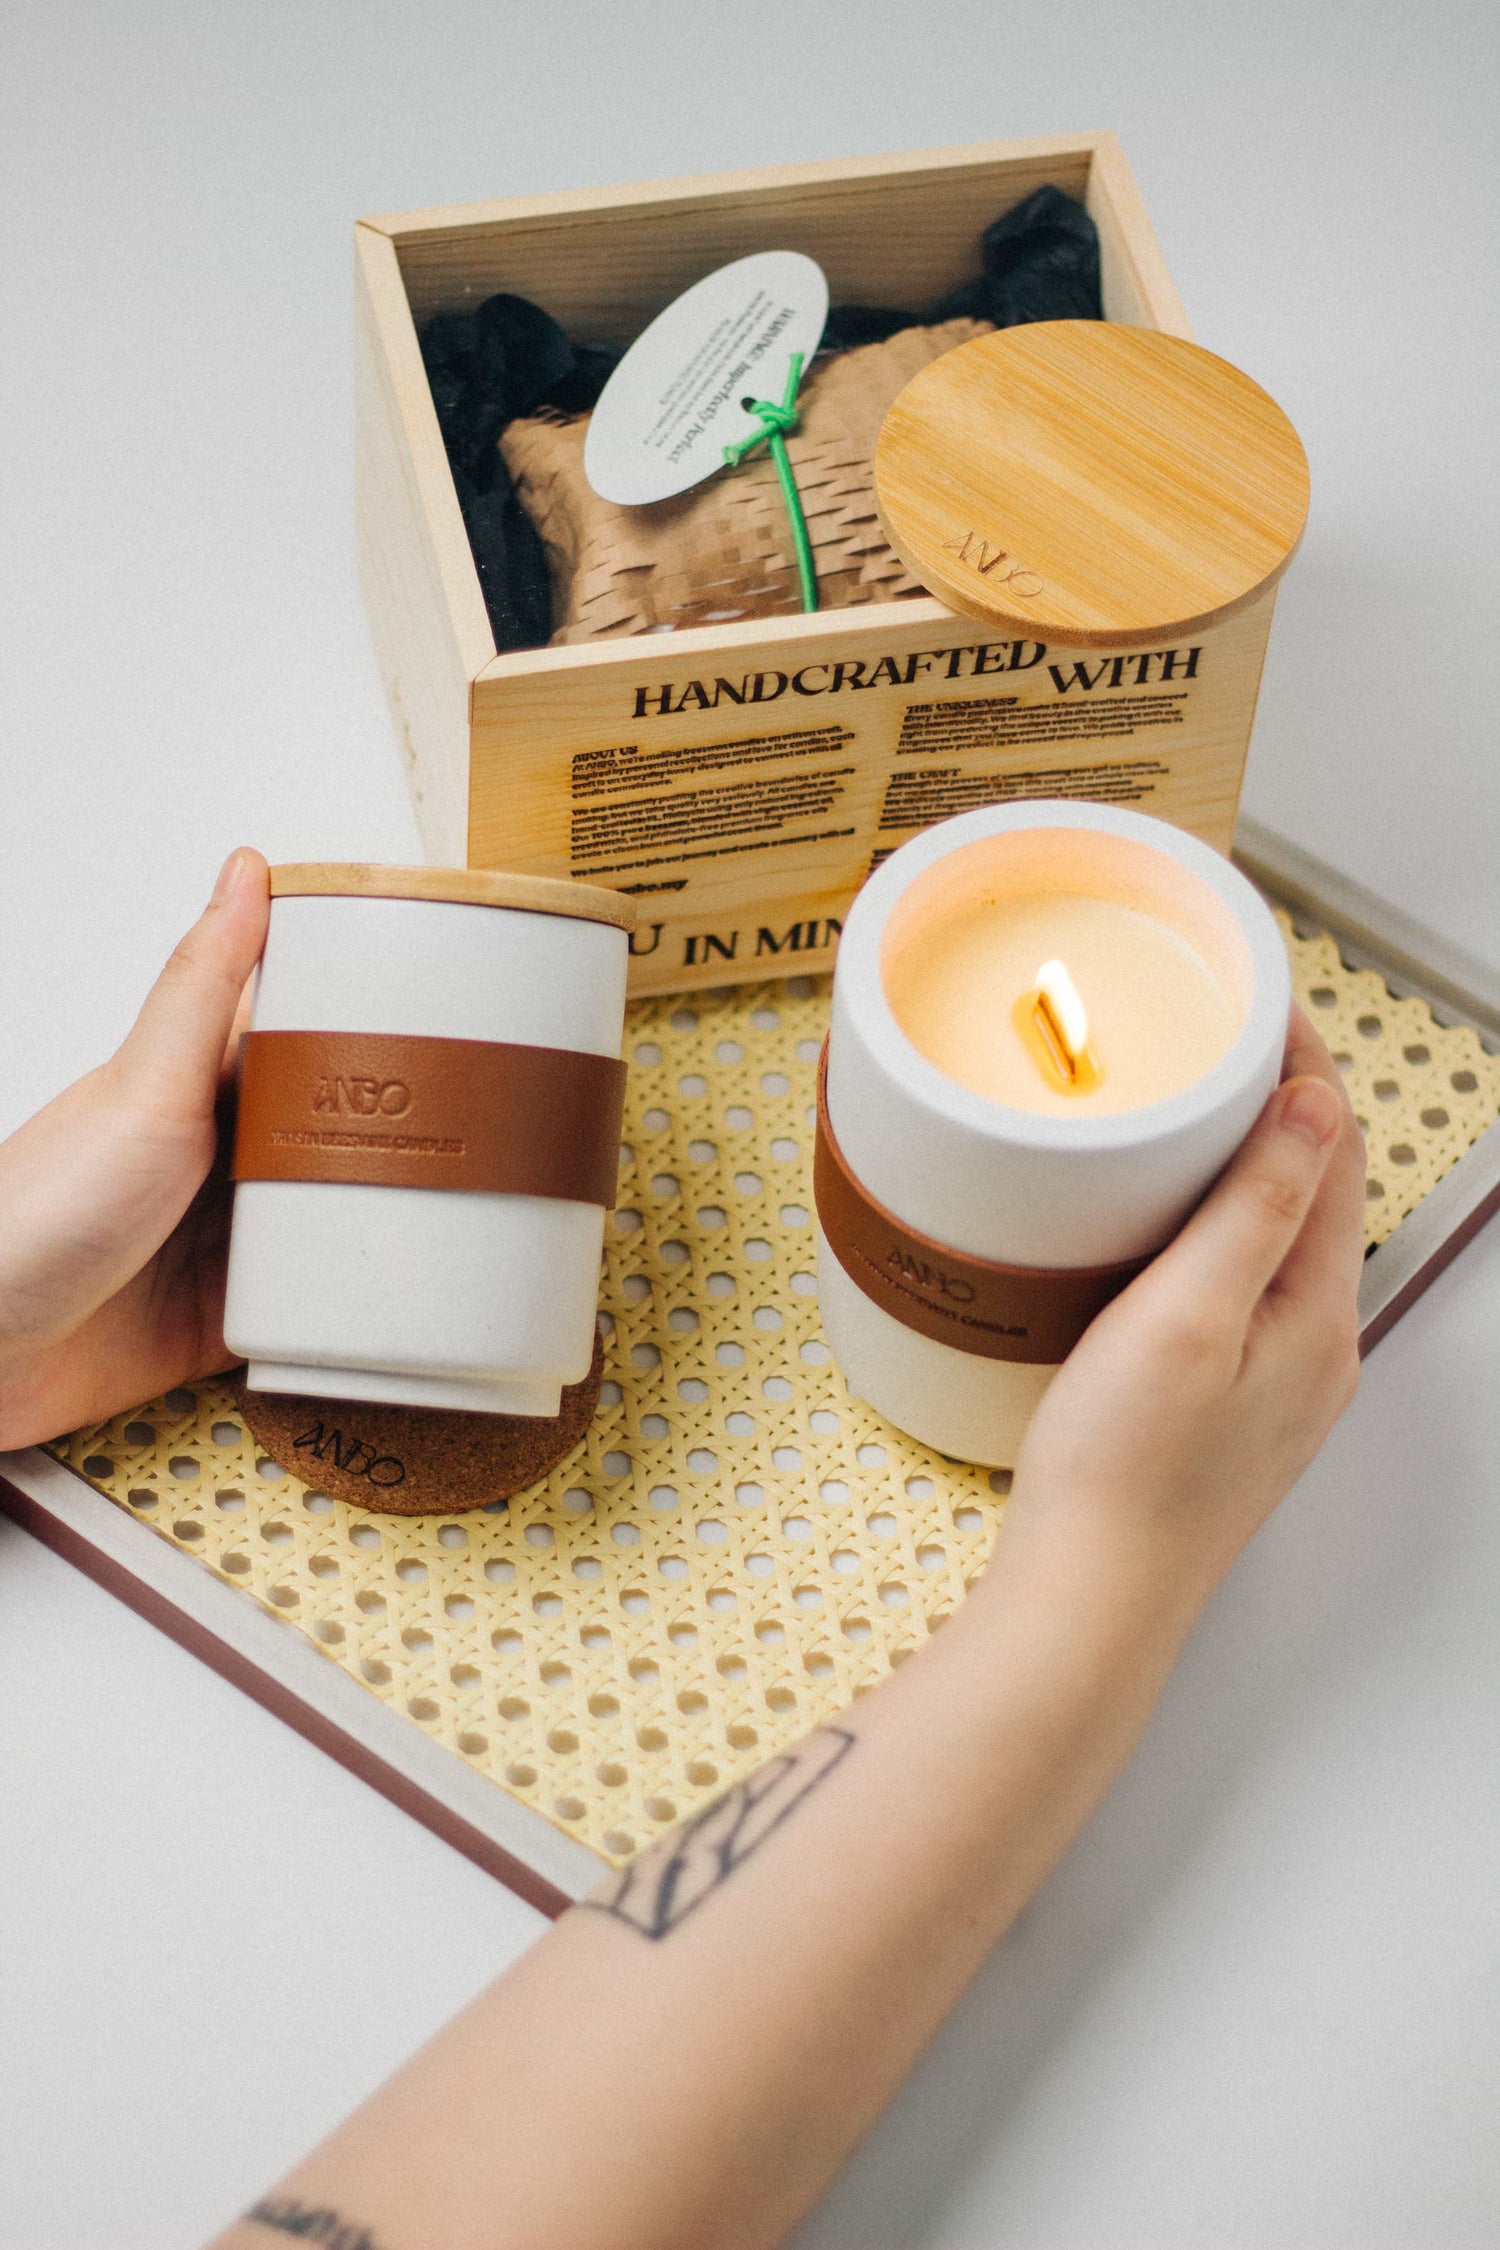 ANBO Concrete Series Beeswax Candles & Wood Box Packaging